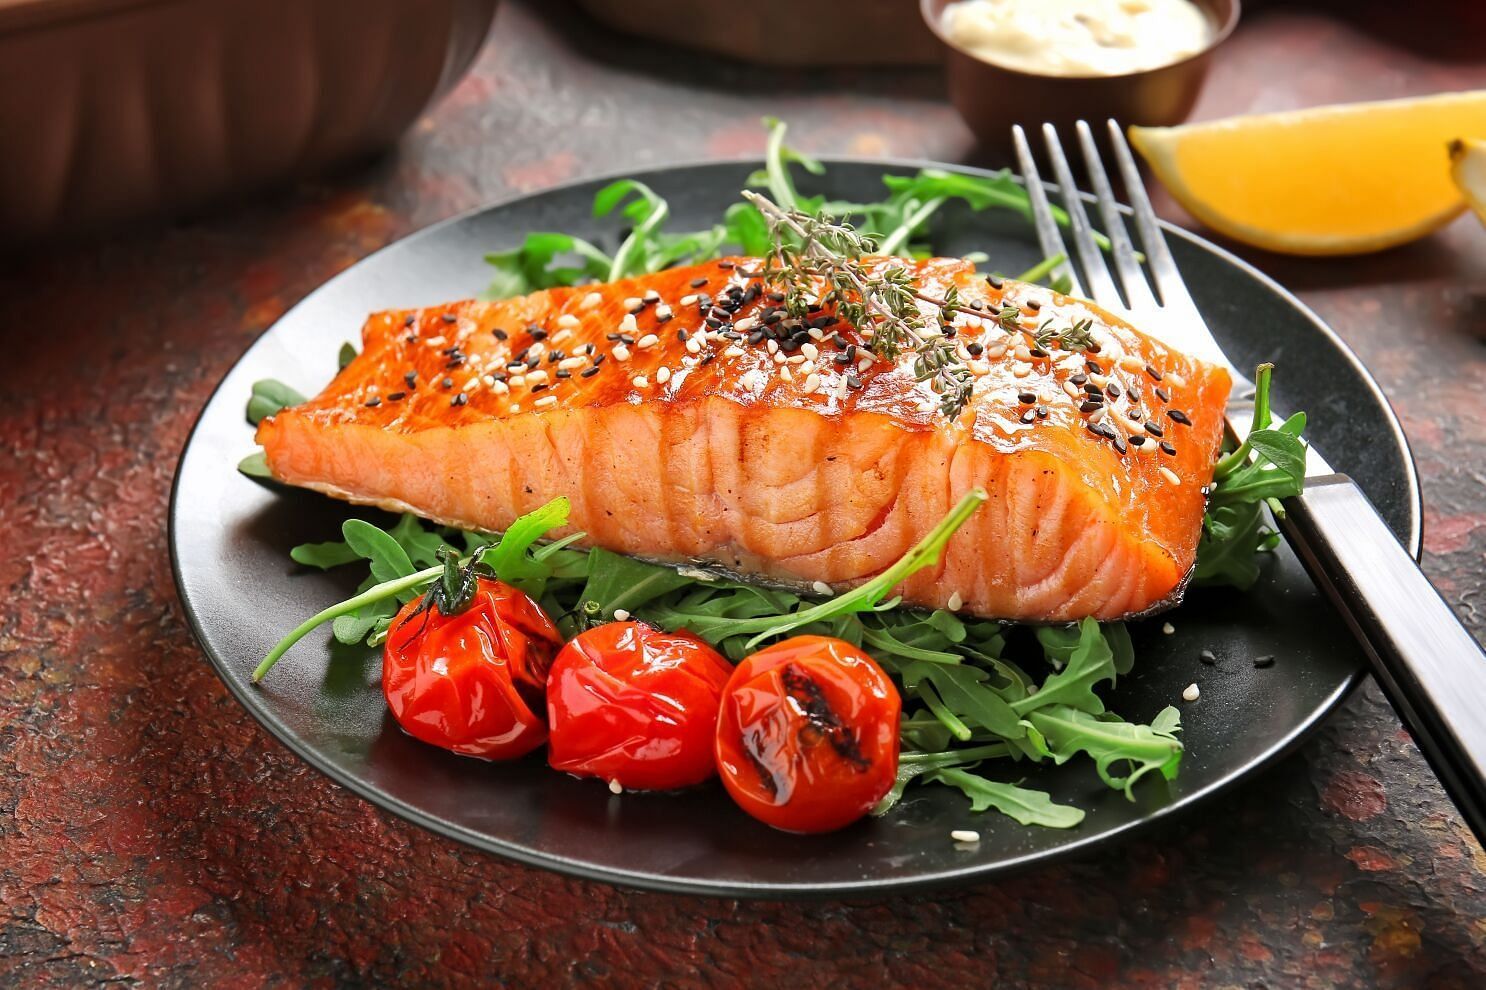 Fatty fish in best foods for skin repair (Image via Getty Images)